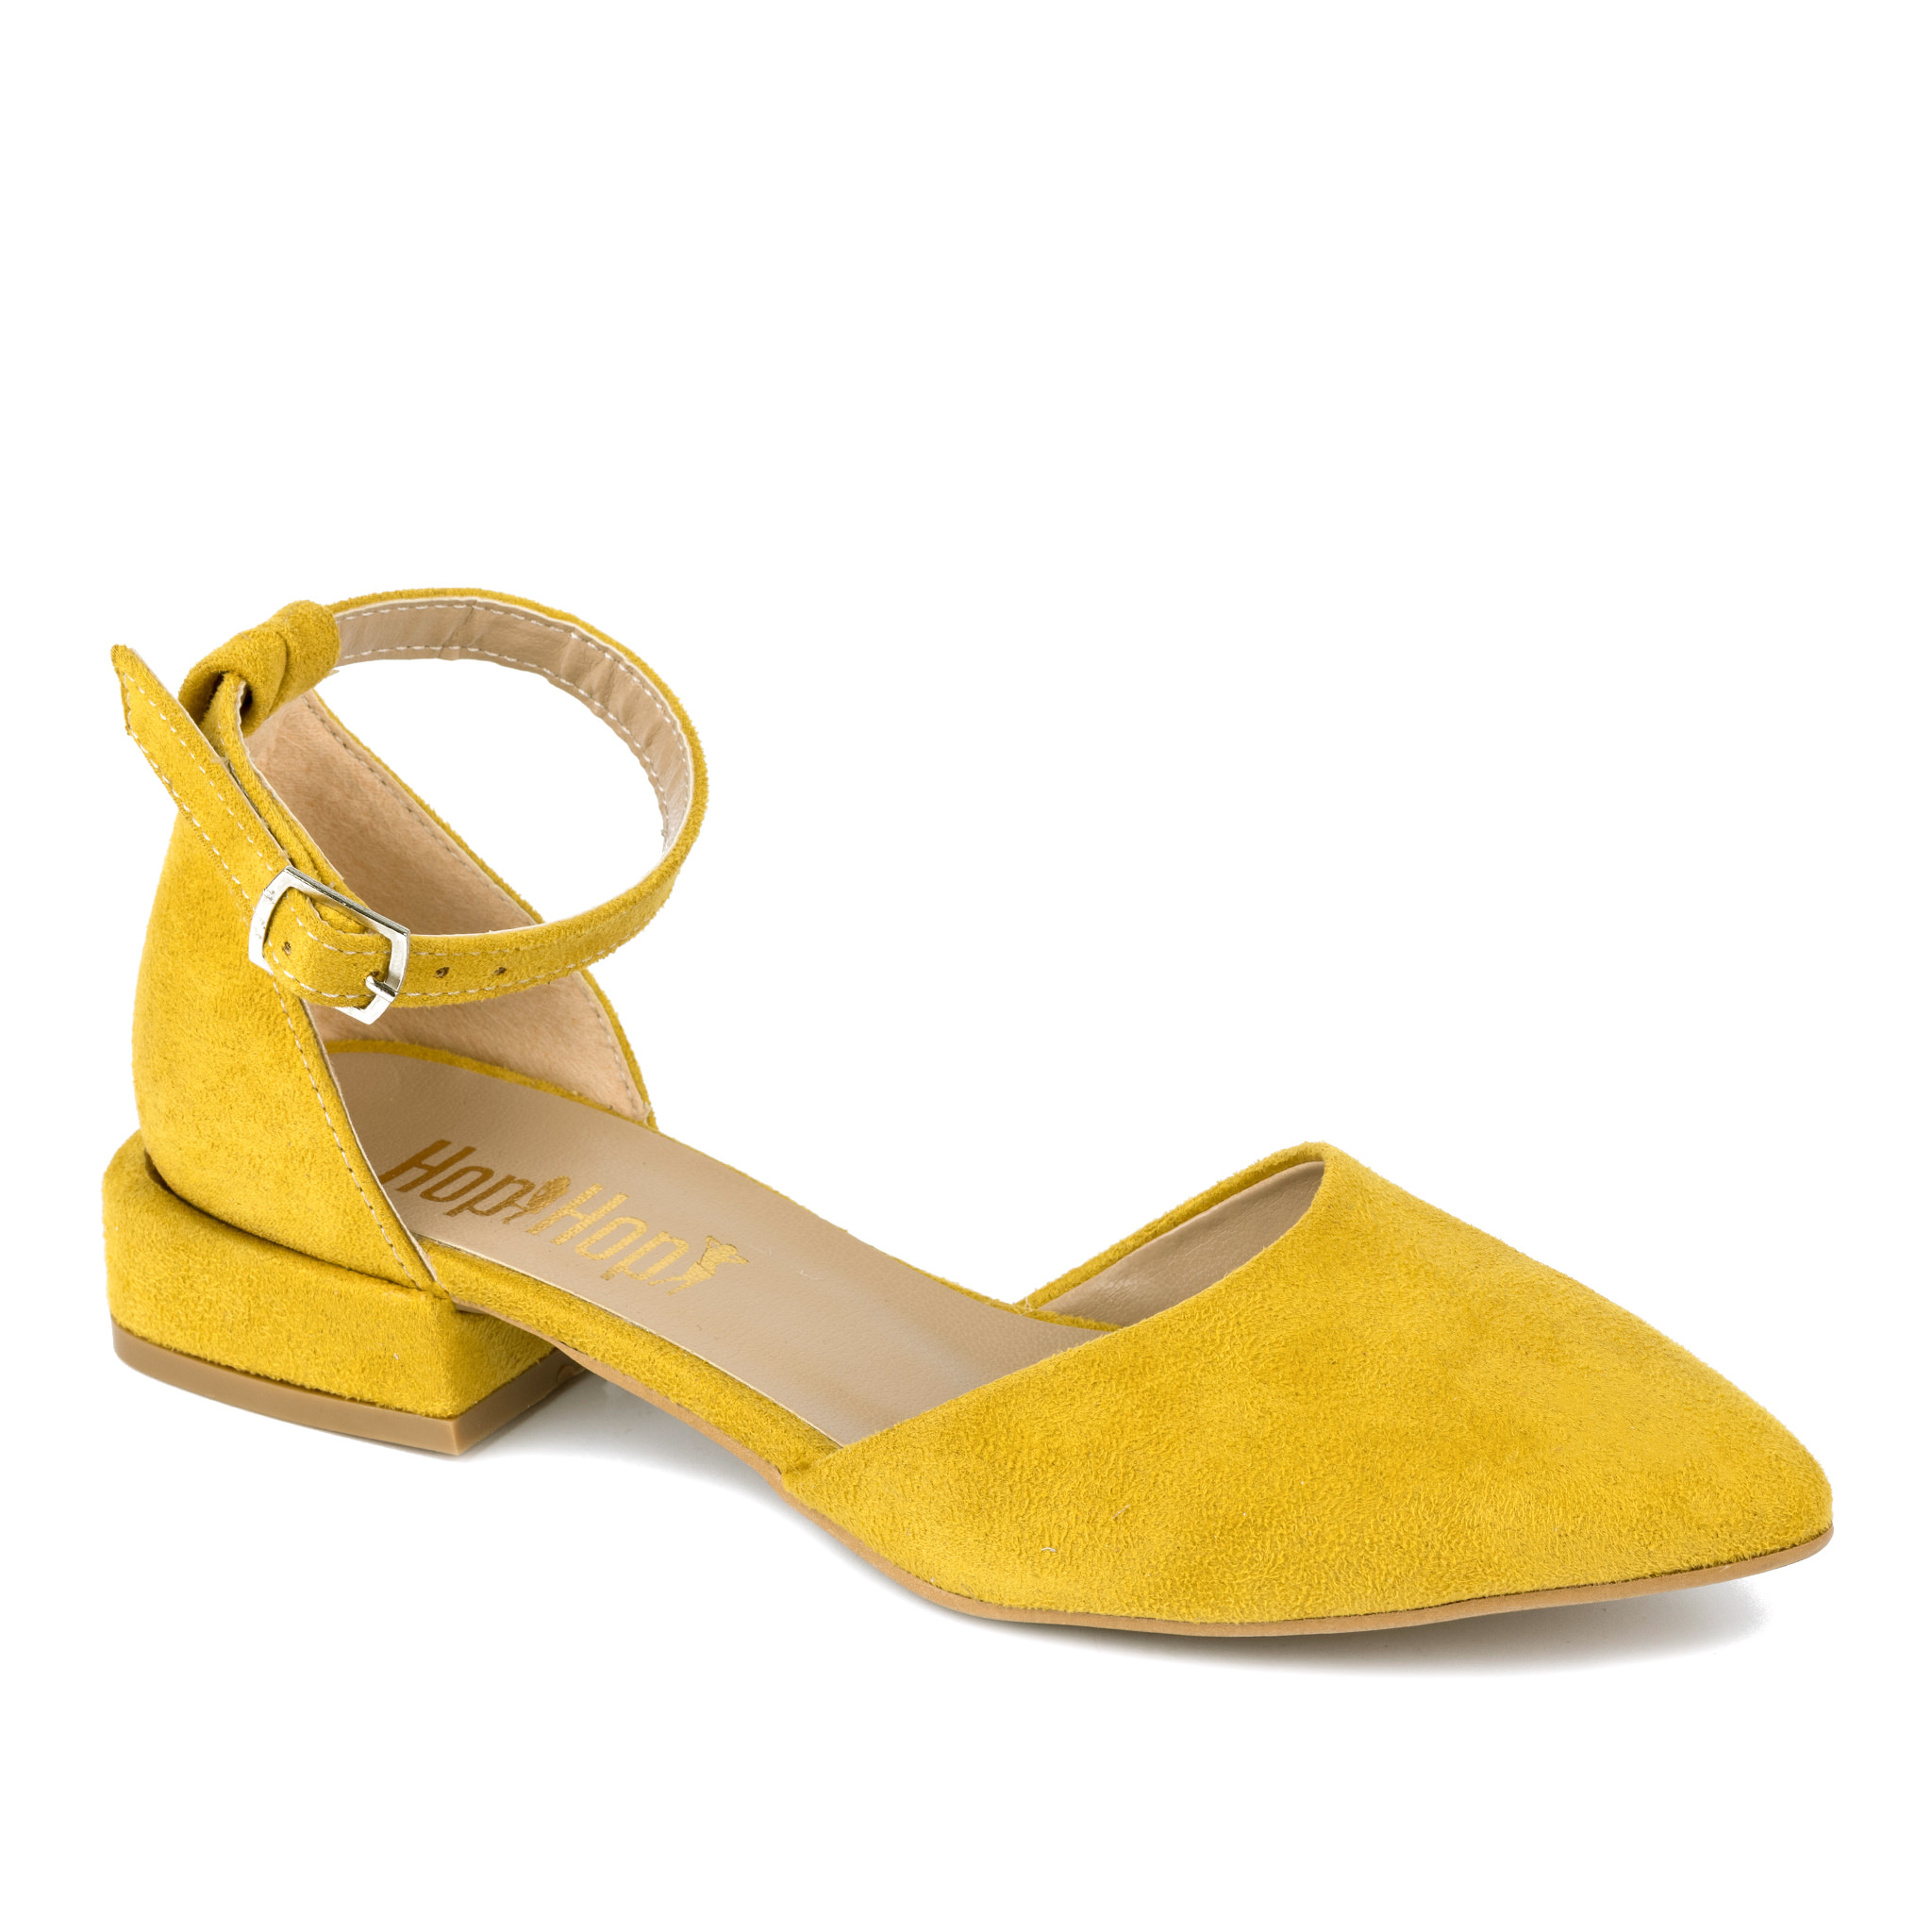 POINTED SANDALS WITH LOW BLOCK HEEL - YELLOW